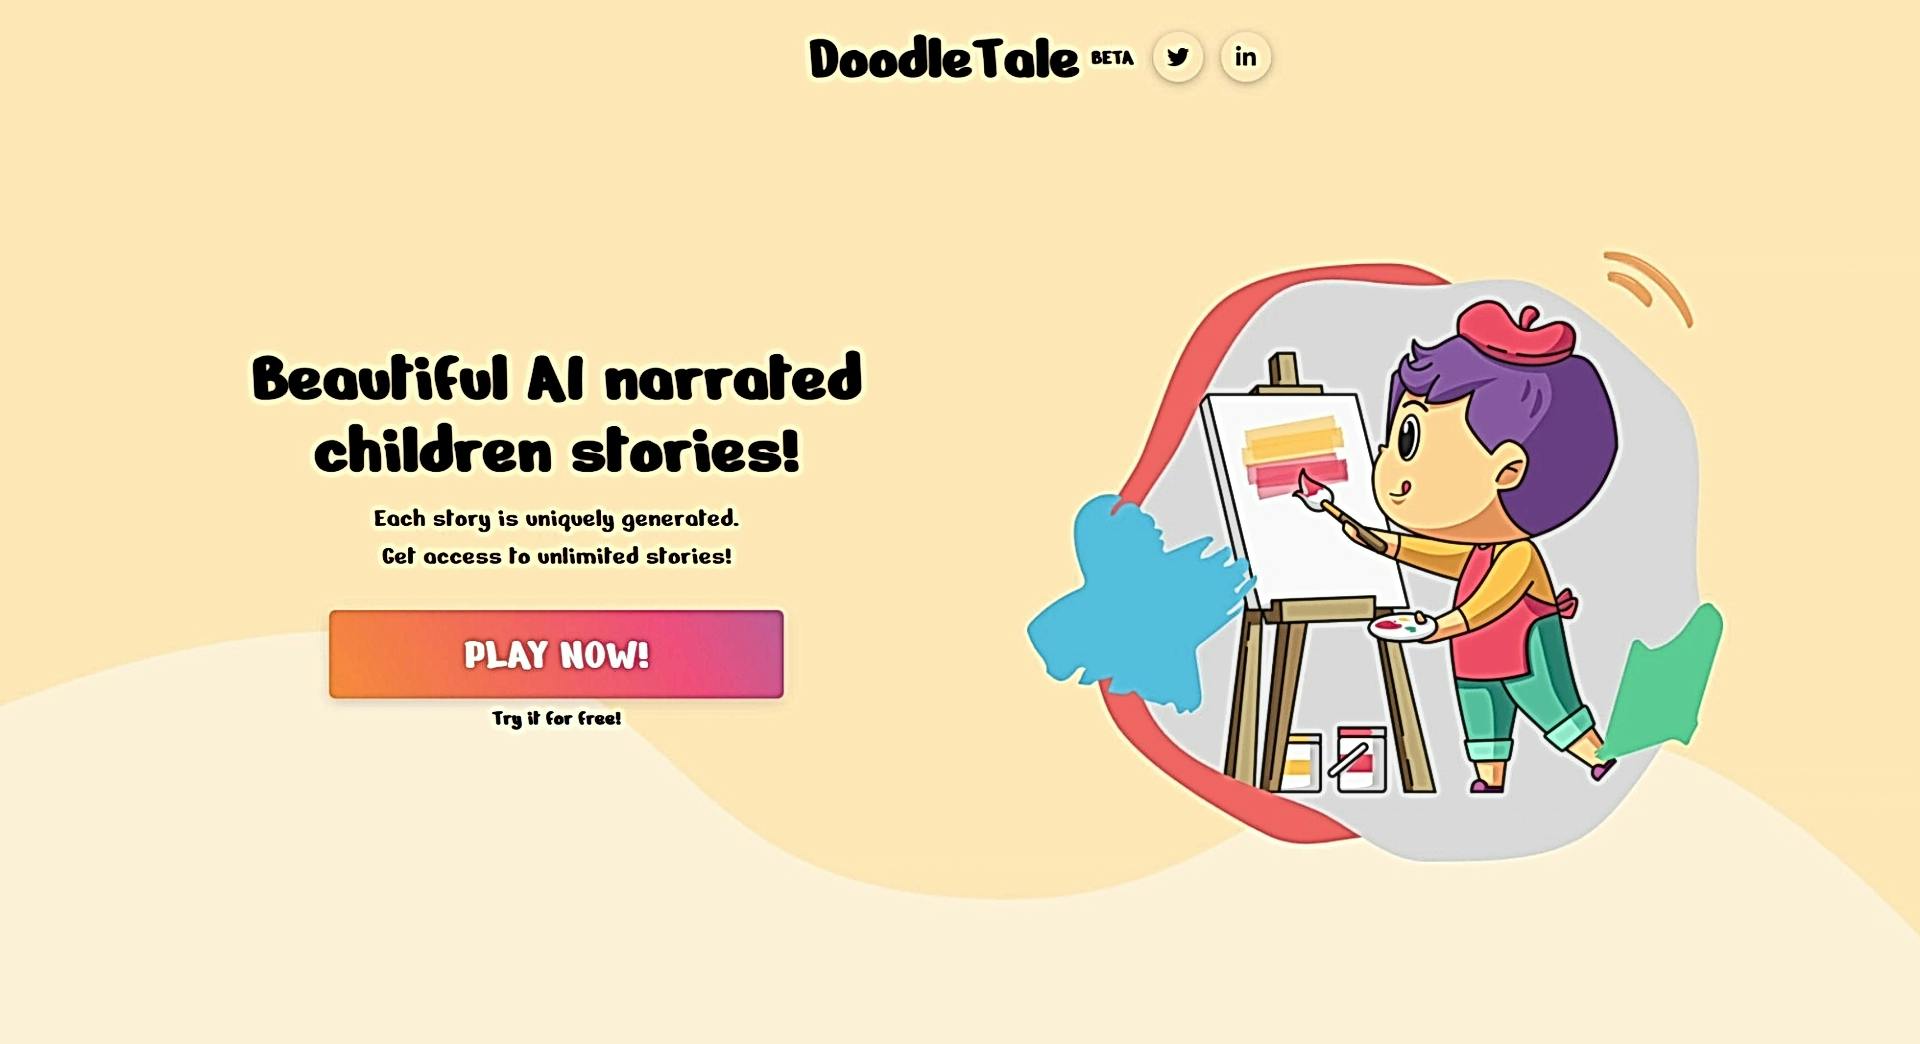 Doodle Tale featured